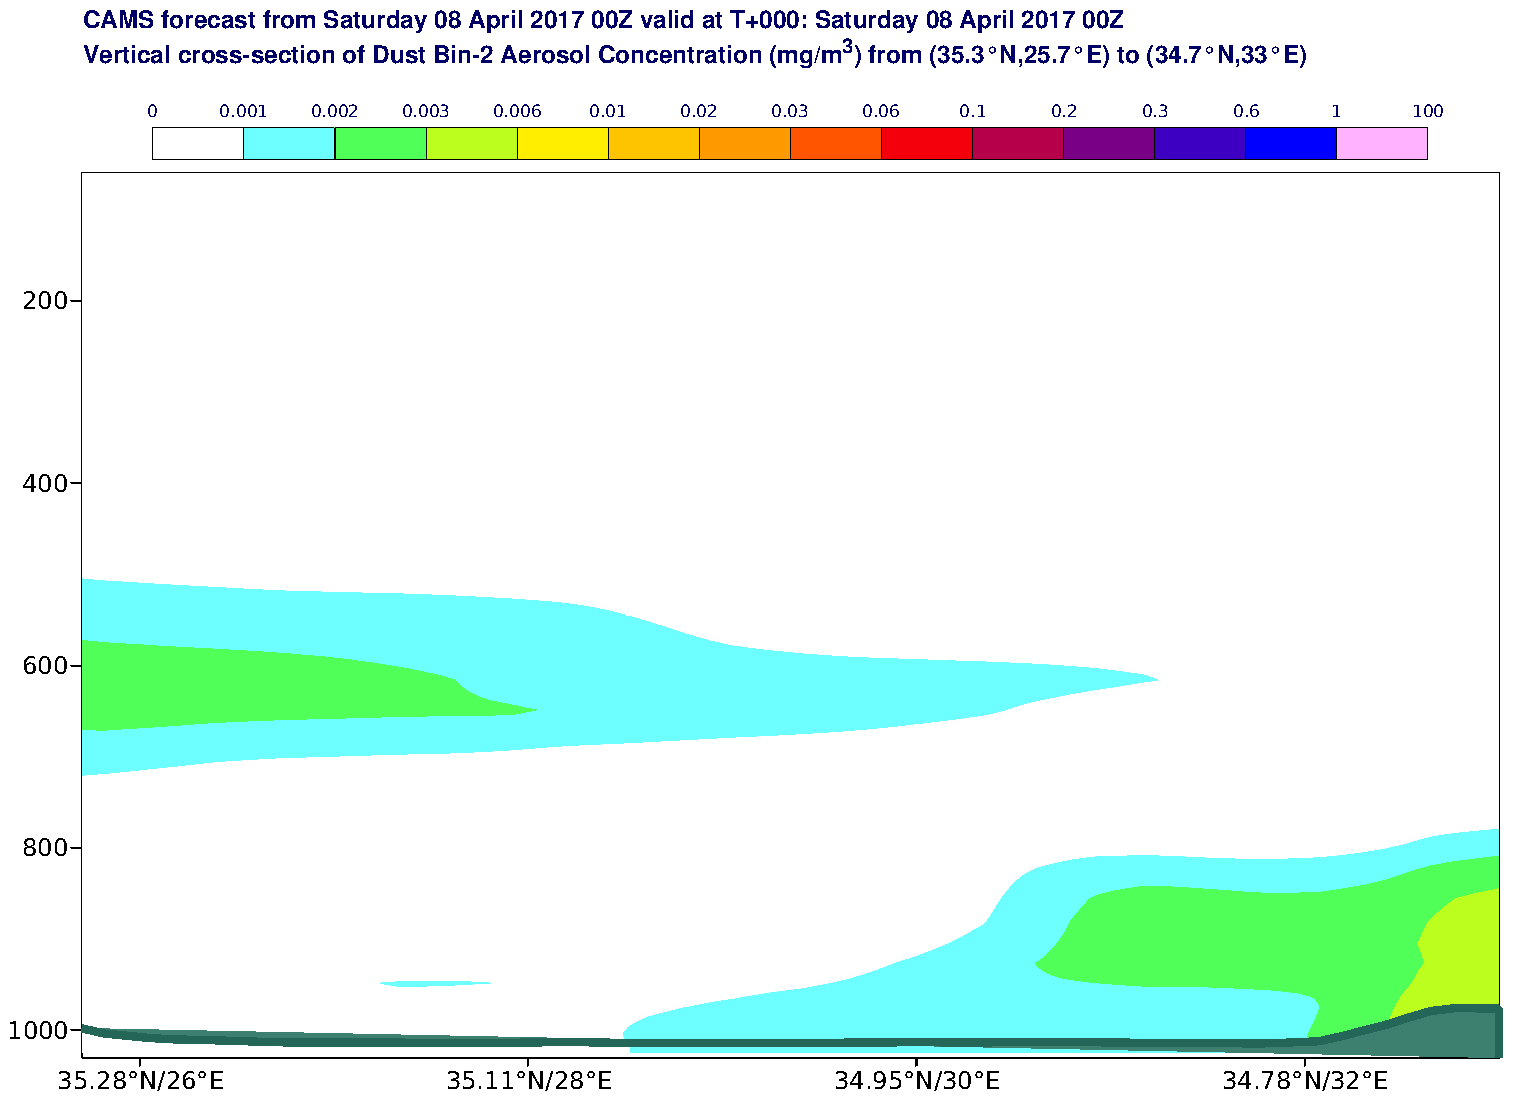 Vertical cross-section of Dust Bin-2 Aerosol Concentration (mg/m3) valid at T0 - 2017-04-08 00:00